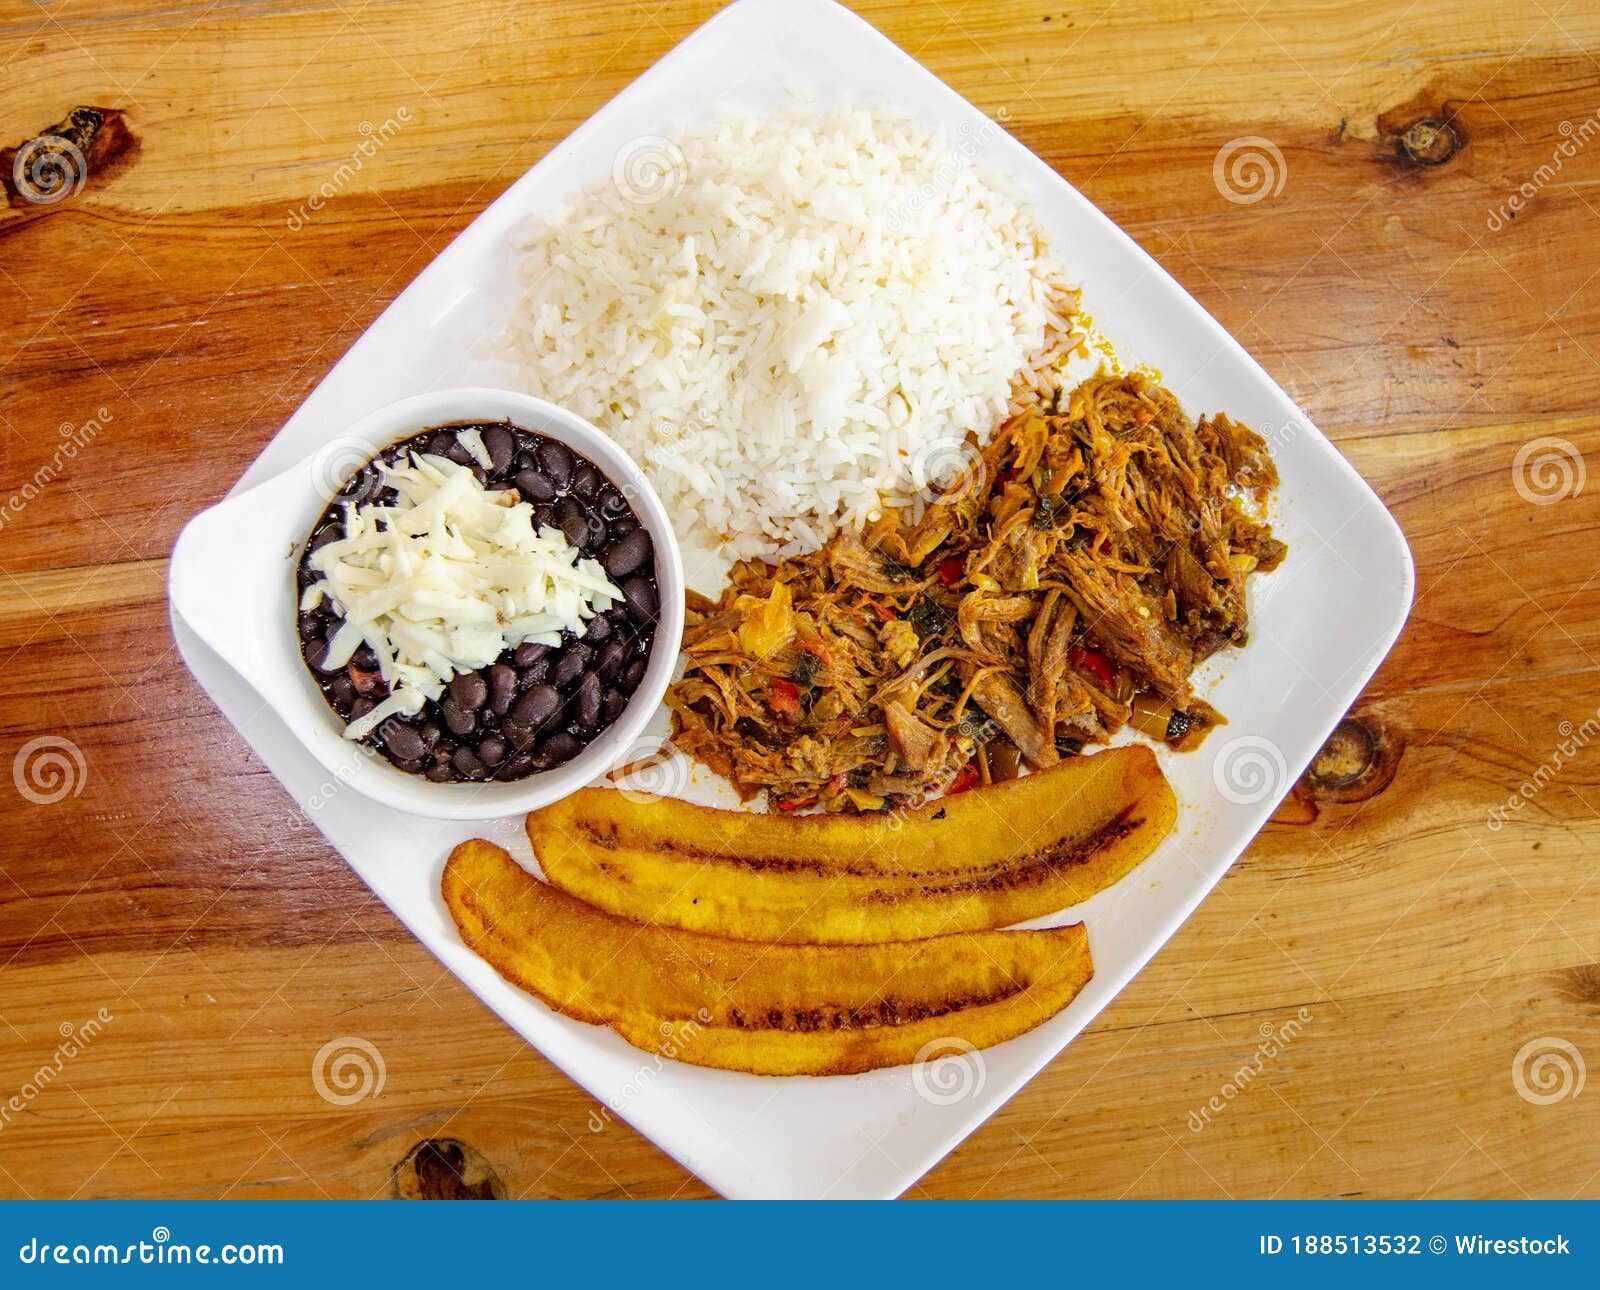 traditional venezuelan pabellon dish made with beans, rice, beef and plantain